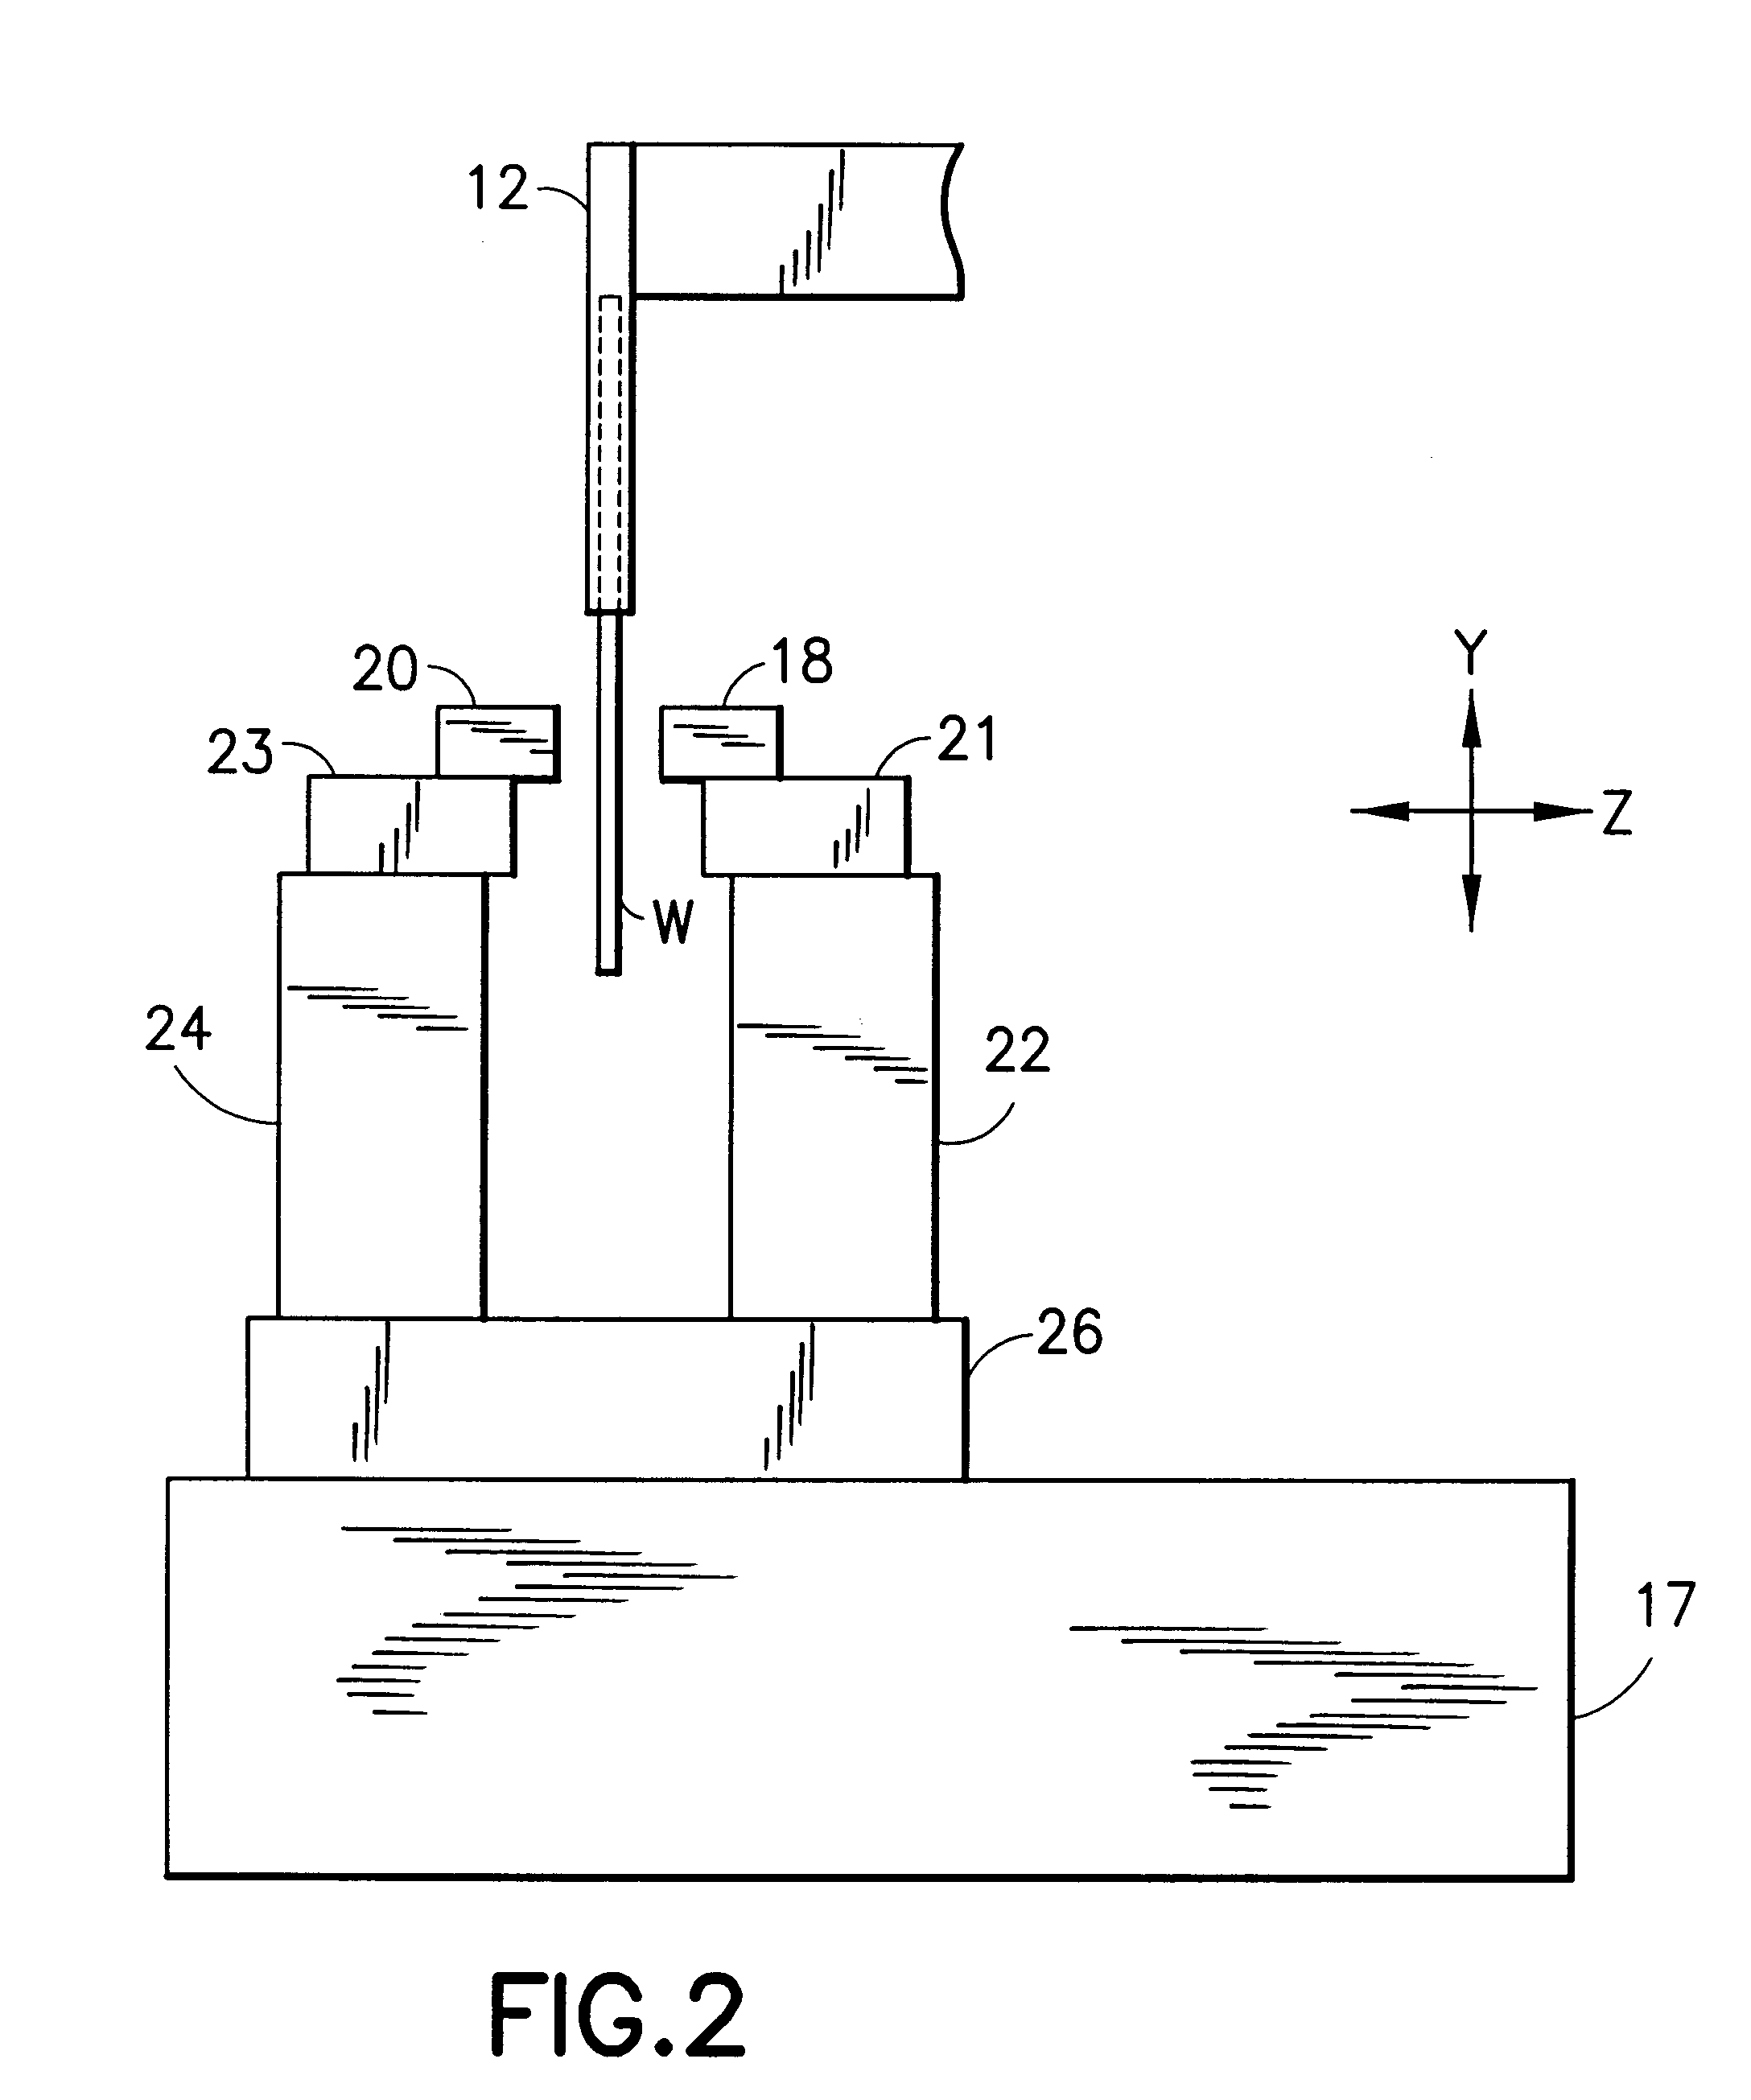 Method and apparatus for moving an article relative to and between a pair of thickness measuring probes to develop a thickness map for the article